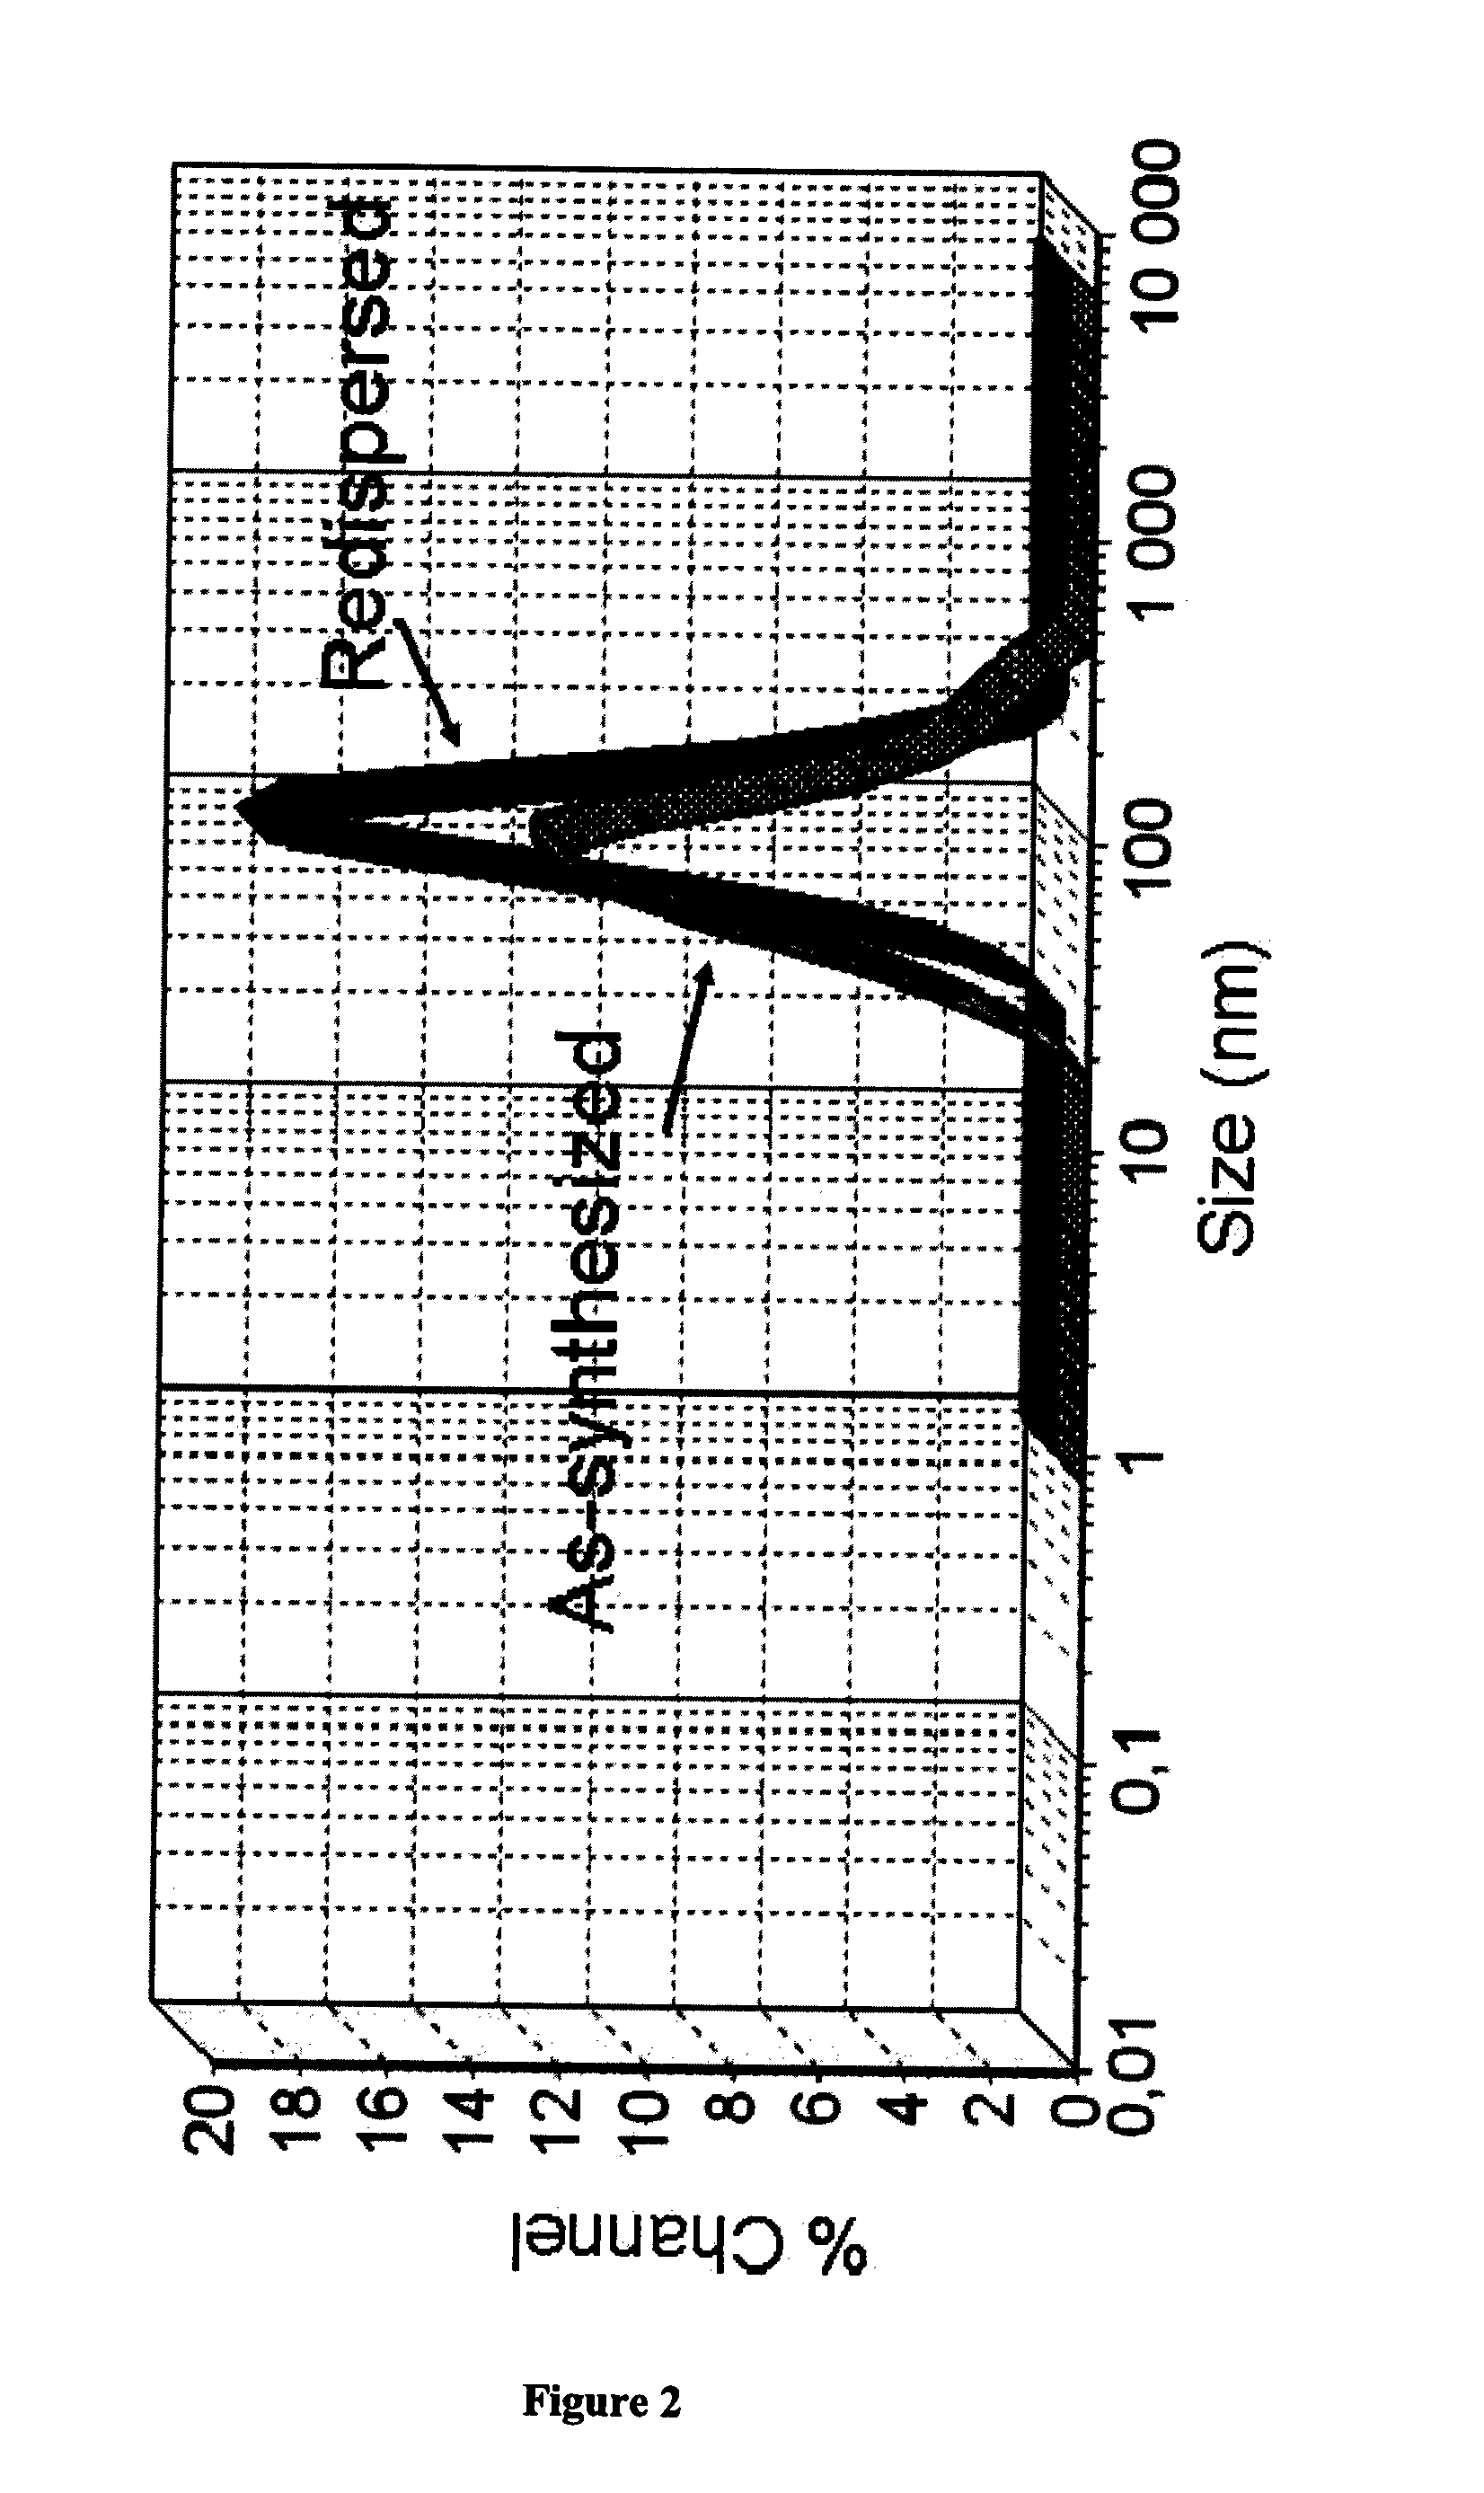 Nanostructured aprepitant compositions, process for the preparation thereof and pharmaceutical compositions containing them